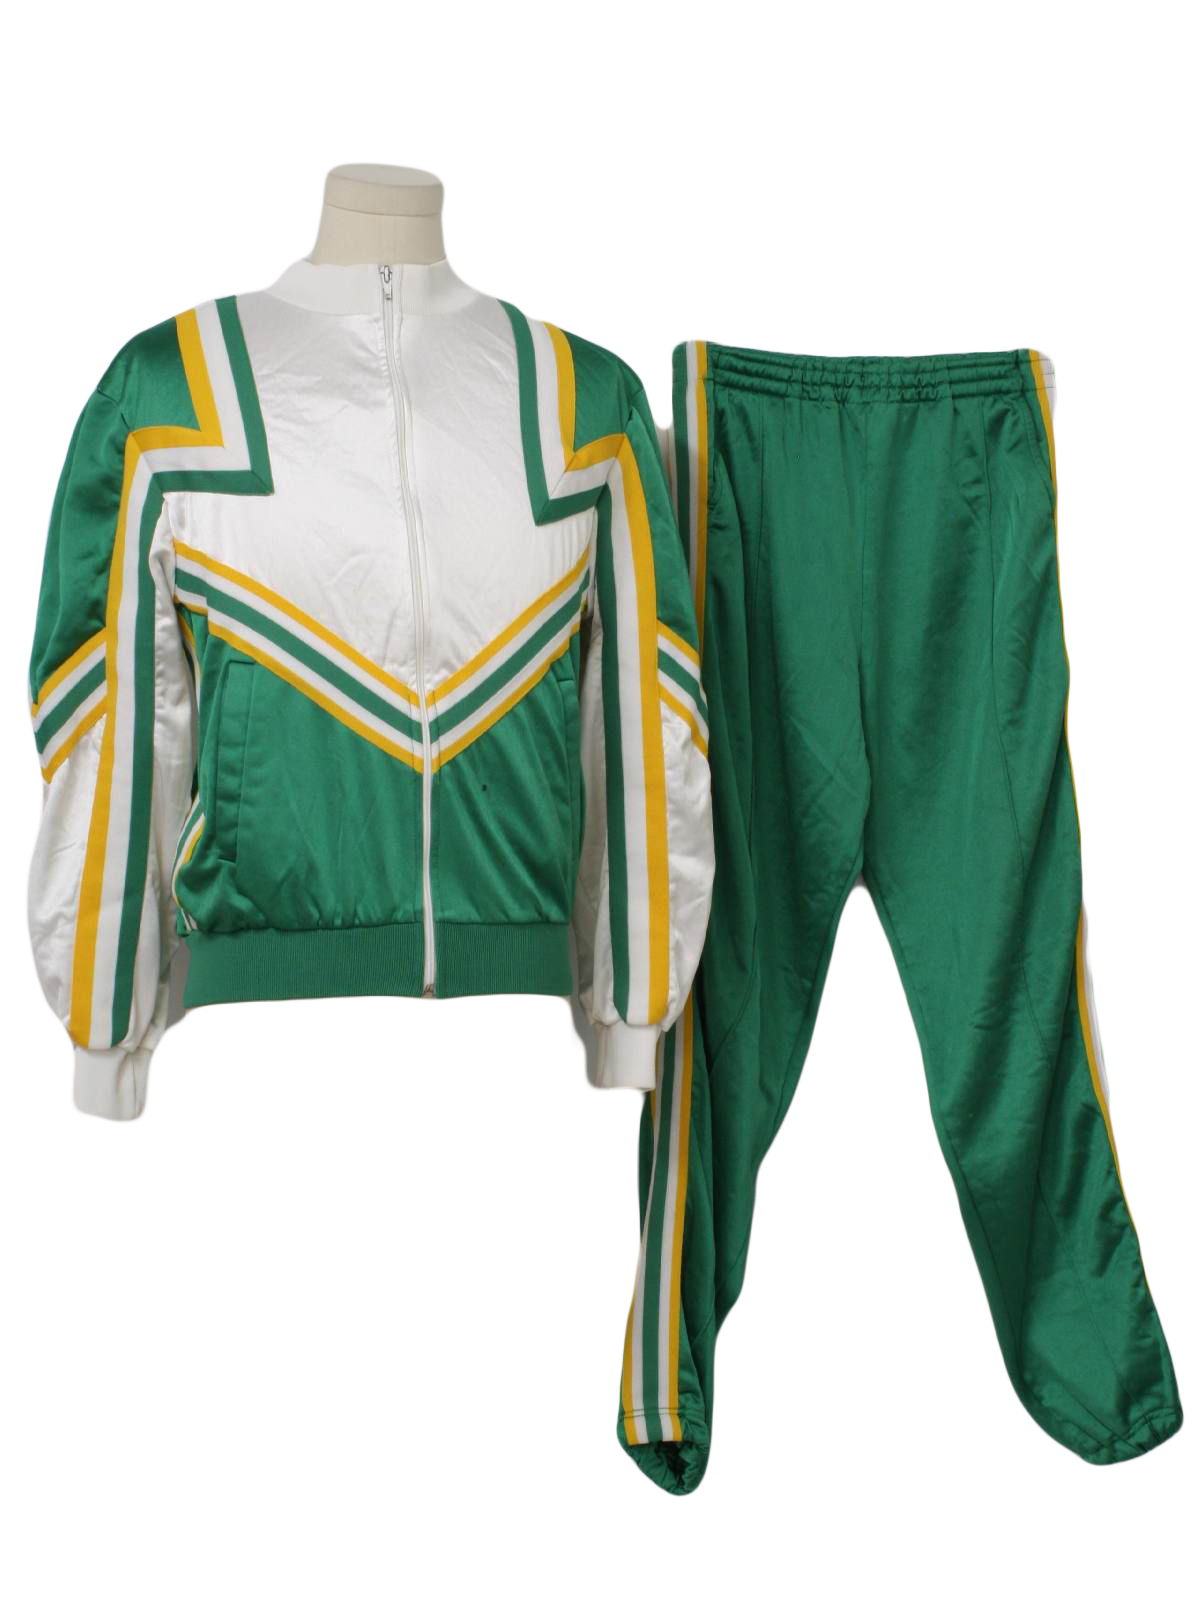 Retro 70s Suit Teammates 70s Teammates Mens Two Piece Track Suit With Kelly Green Background Gold White Nylon Satin Knit Track Jacket With Waist Length Styling Ribbed Knit Waistband Cuffs And